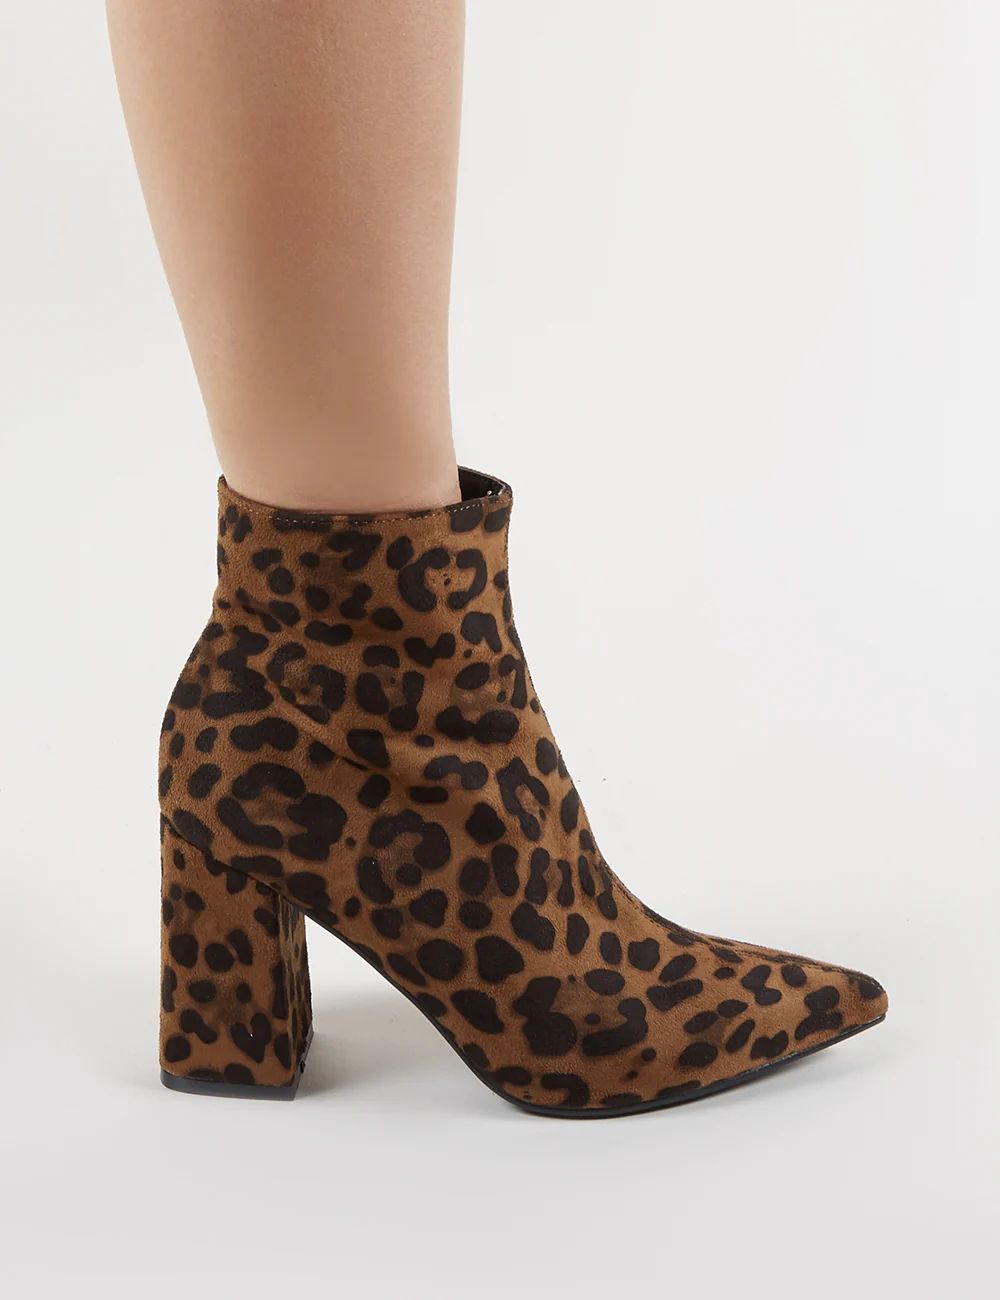 Empire Pointed Toe Ankle Boots in Leopard Print | Public Desire